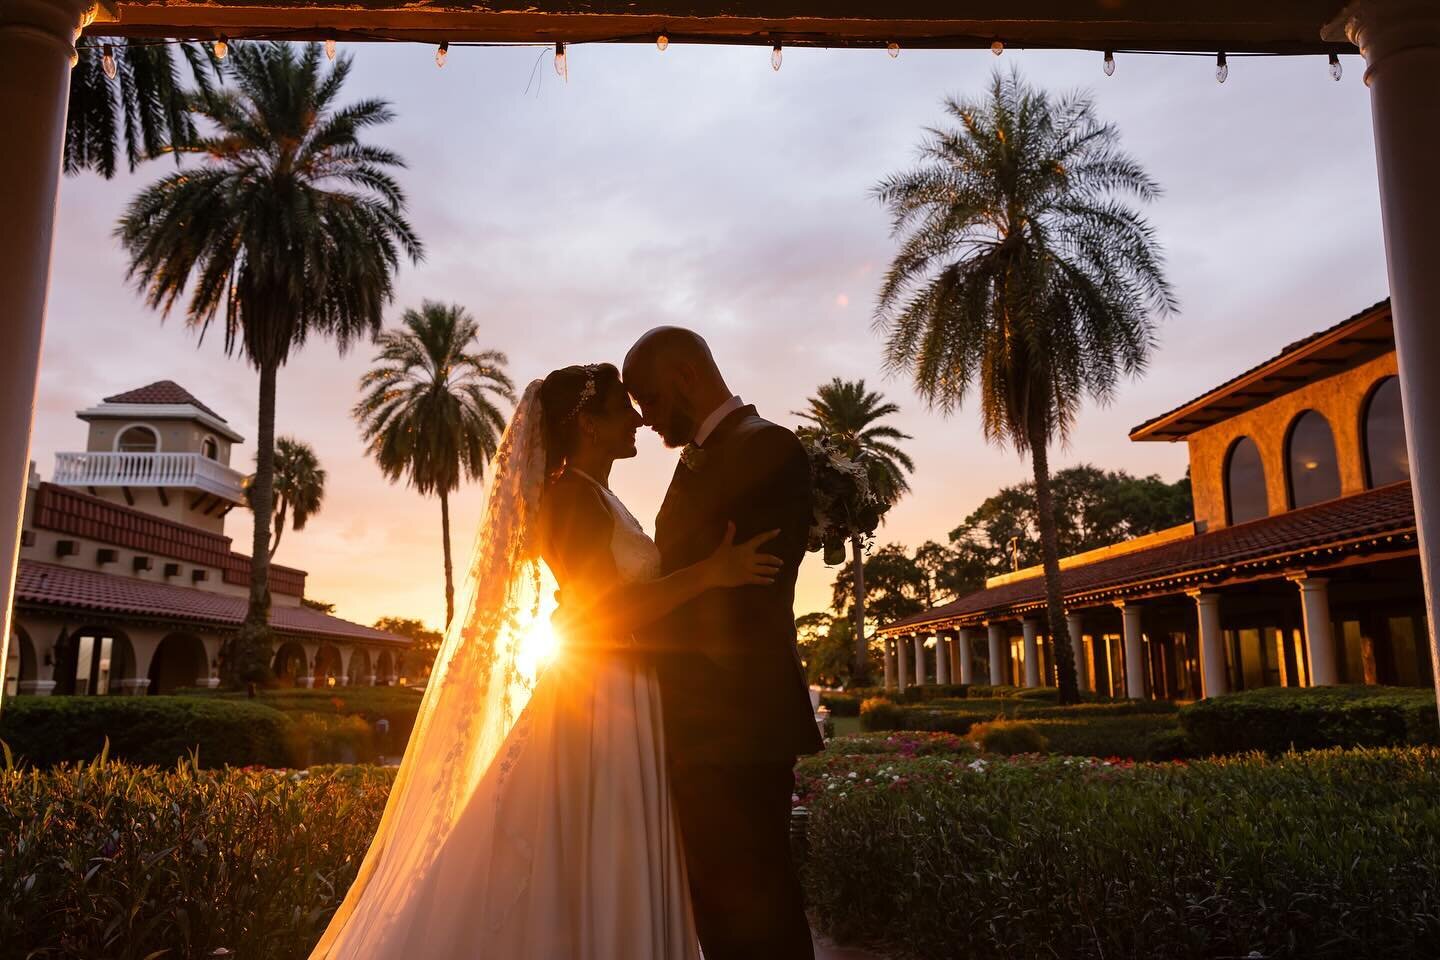 When the sunset hits just right &hellip; 🙌🔥😍🌅 

&mdash;NOW BOOKING 2024/2025&mdash;

www.DreamscapePhotography.com

Amazing Vendor Team: 
Venue: @missionresortweddings 
Planner: @l3.events 
Photo: @dreamscapephotographyllc
Floral: @bluegrasschicf